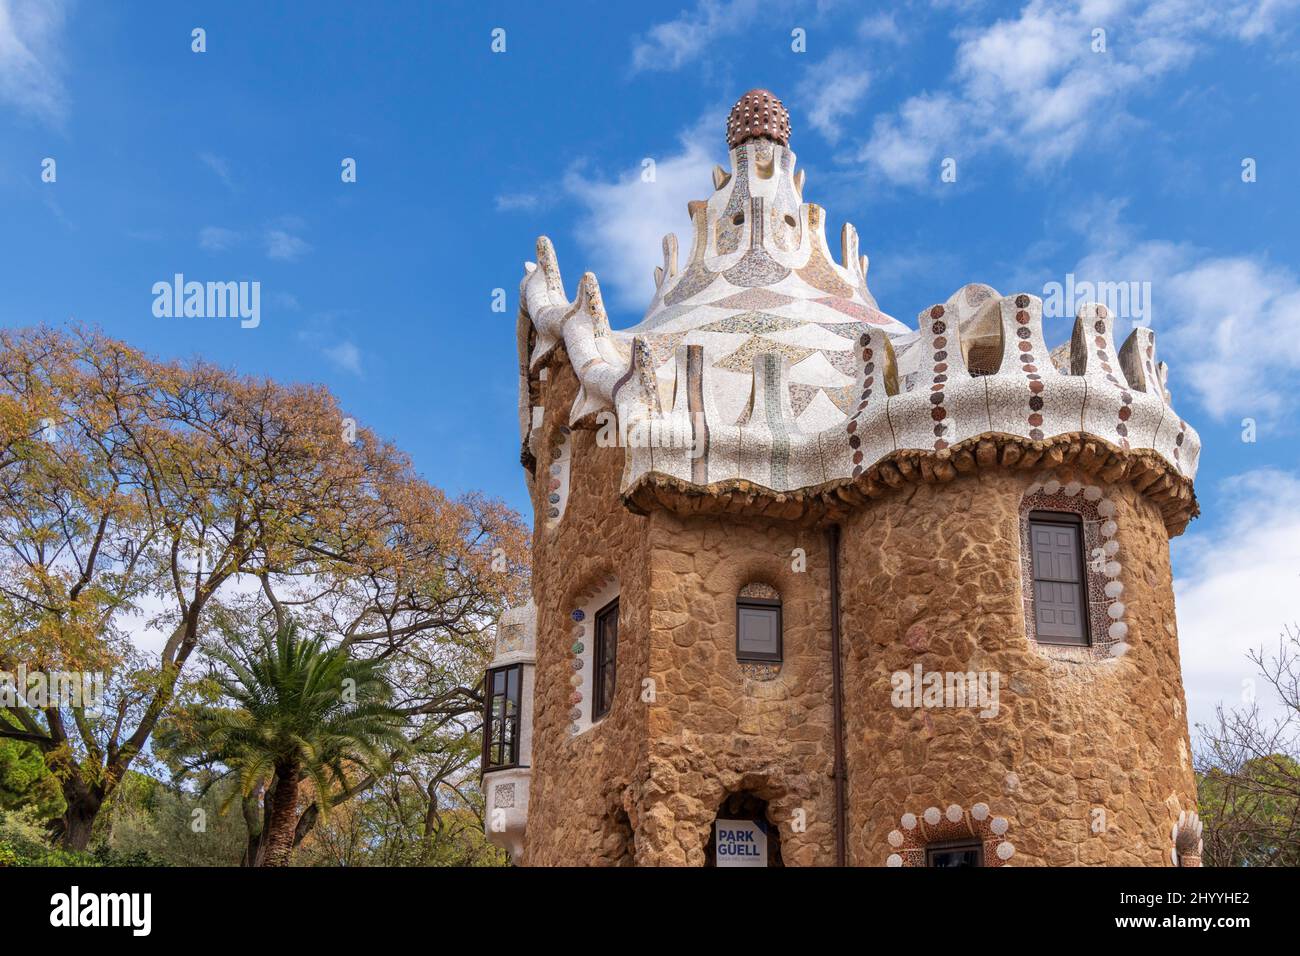 PARK GUELL BARCELONA CATALONIA SPAIN COLOURFUL GAUDI MOSAICS ON THE ROOF OF THE PORTER'S LODGE BUILDING Stock Photo